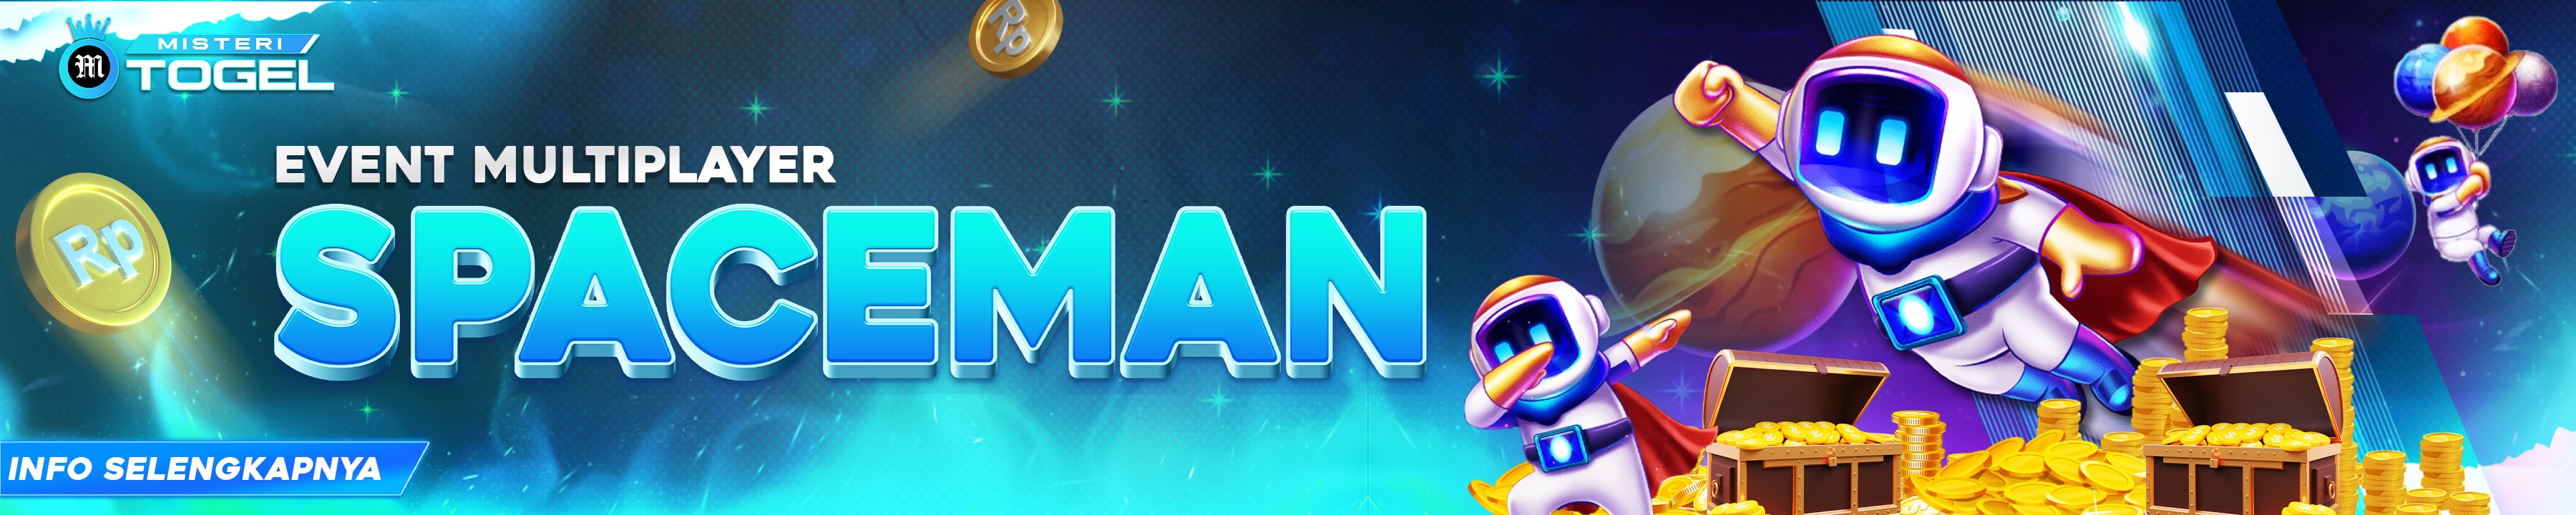 EVENT SPACEMAN